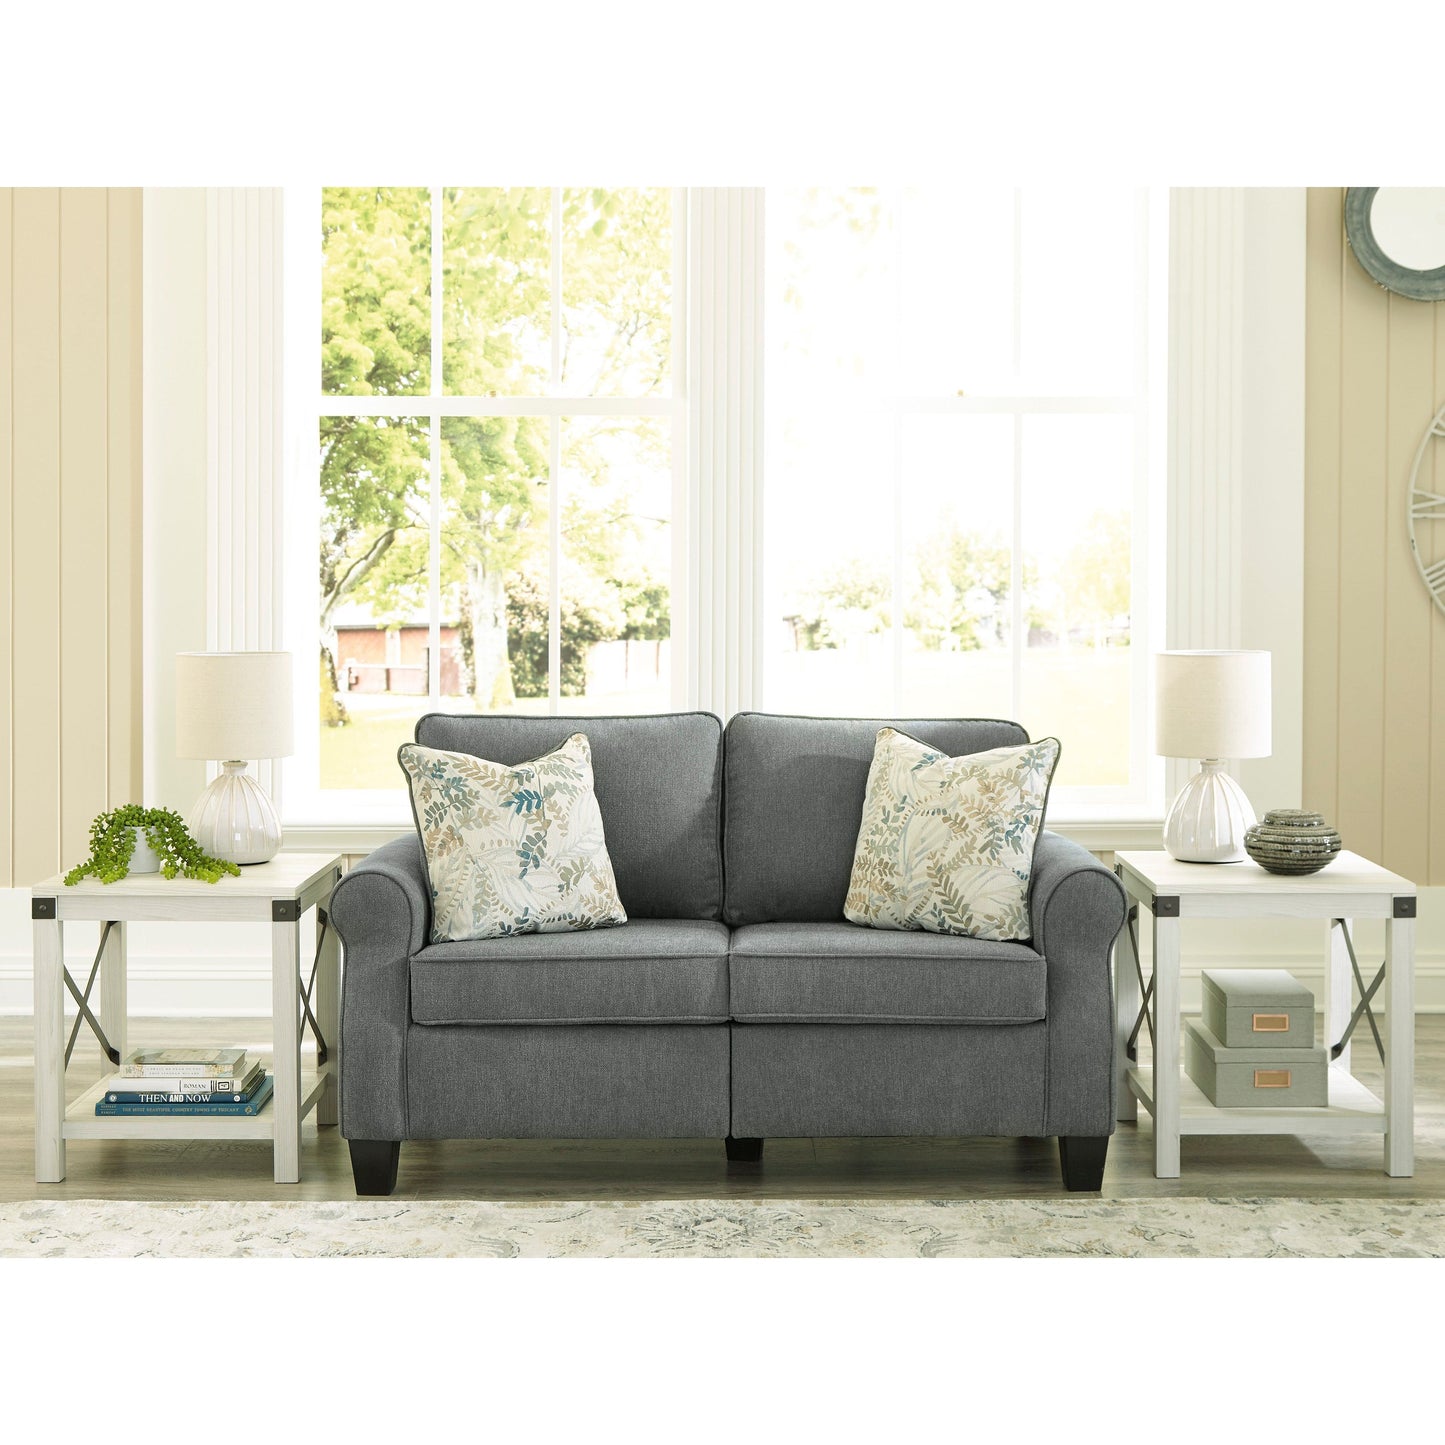 ALESSIO LOVESEAT- CHARCOAL